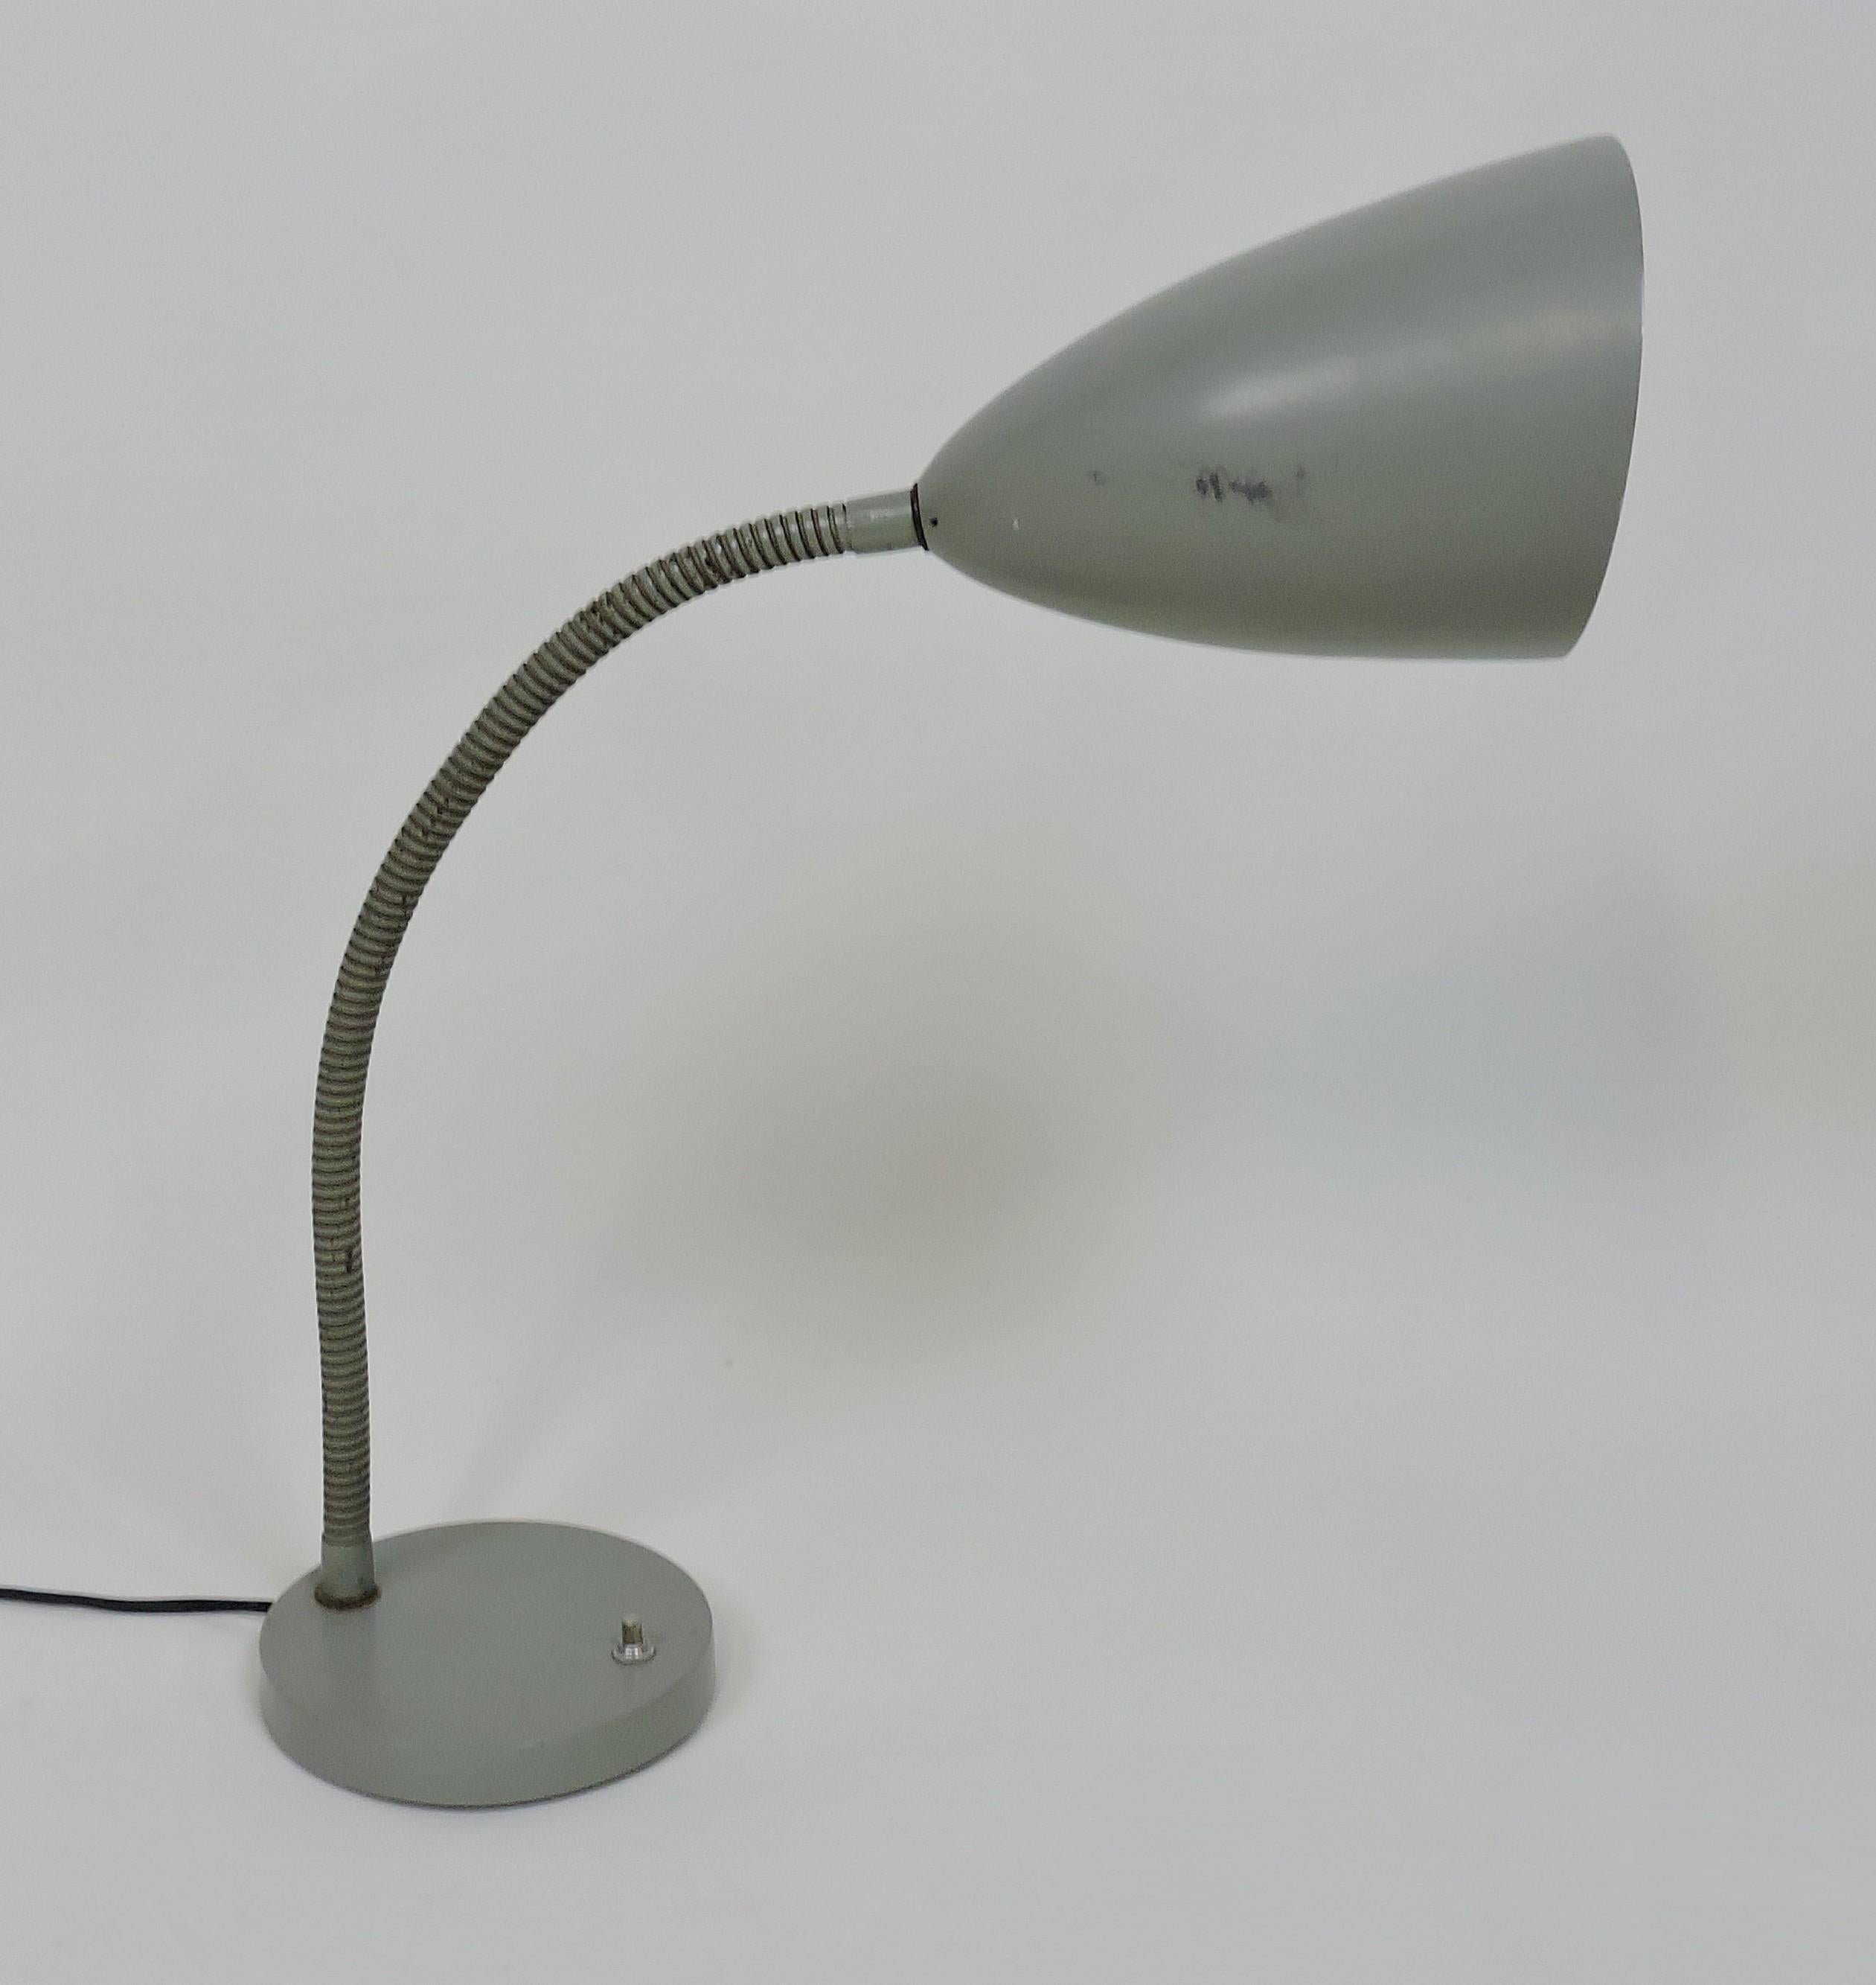 Very cool and practical cone gooseneck desk lamp designed by Kurt Versen. This lamp can be adjusted in an infinite variety of positions so that the light can be directed just where you need it.